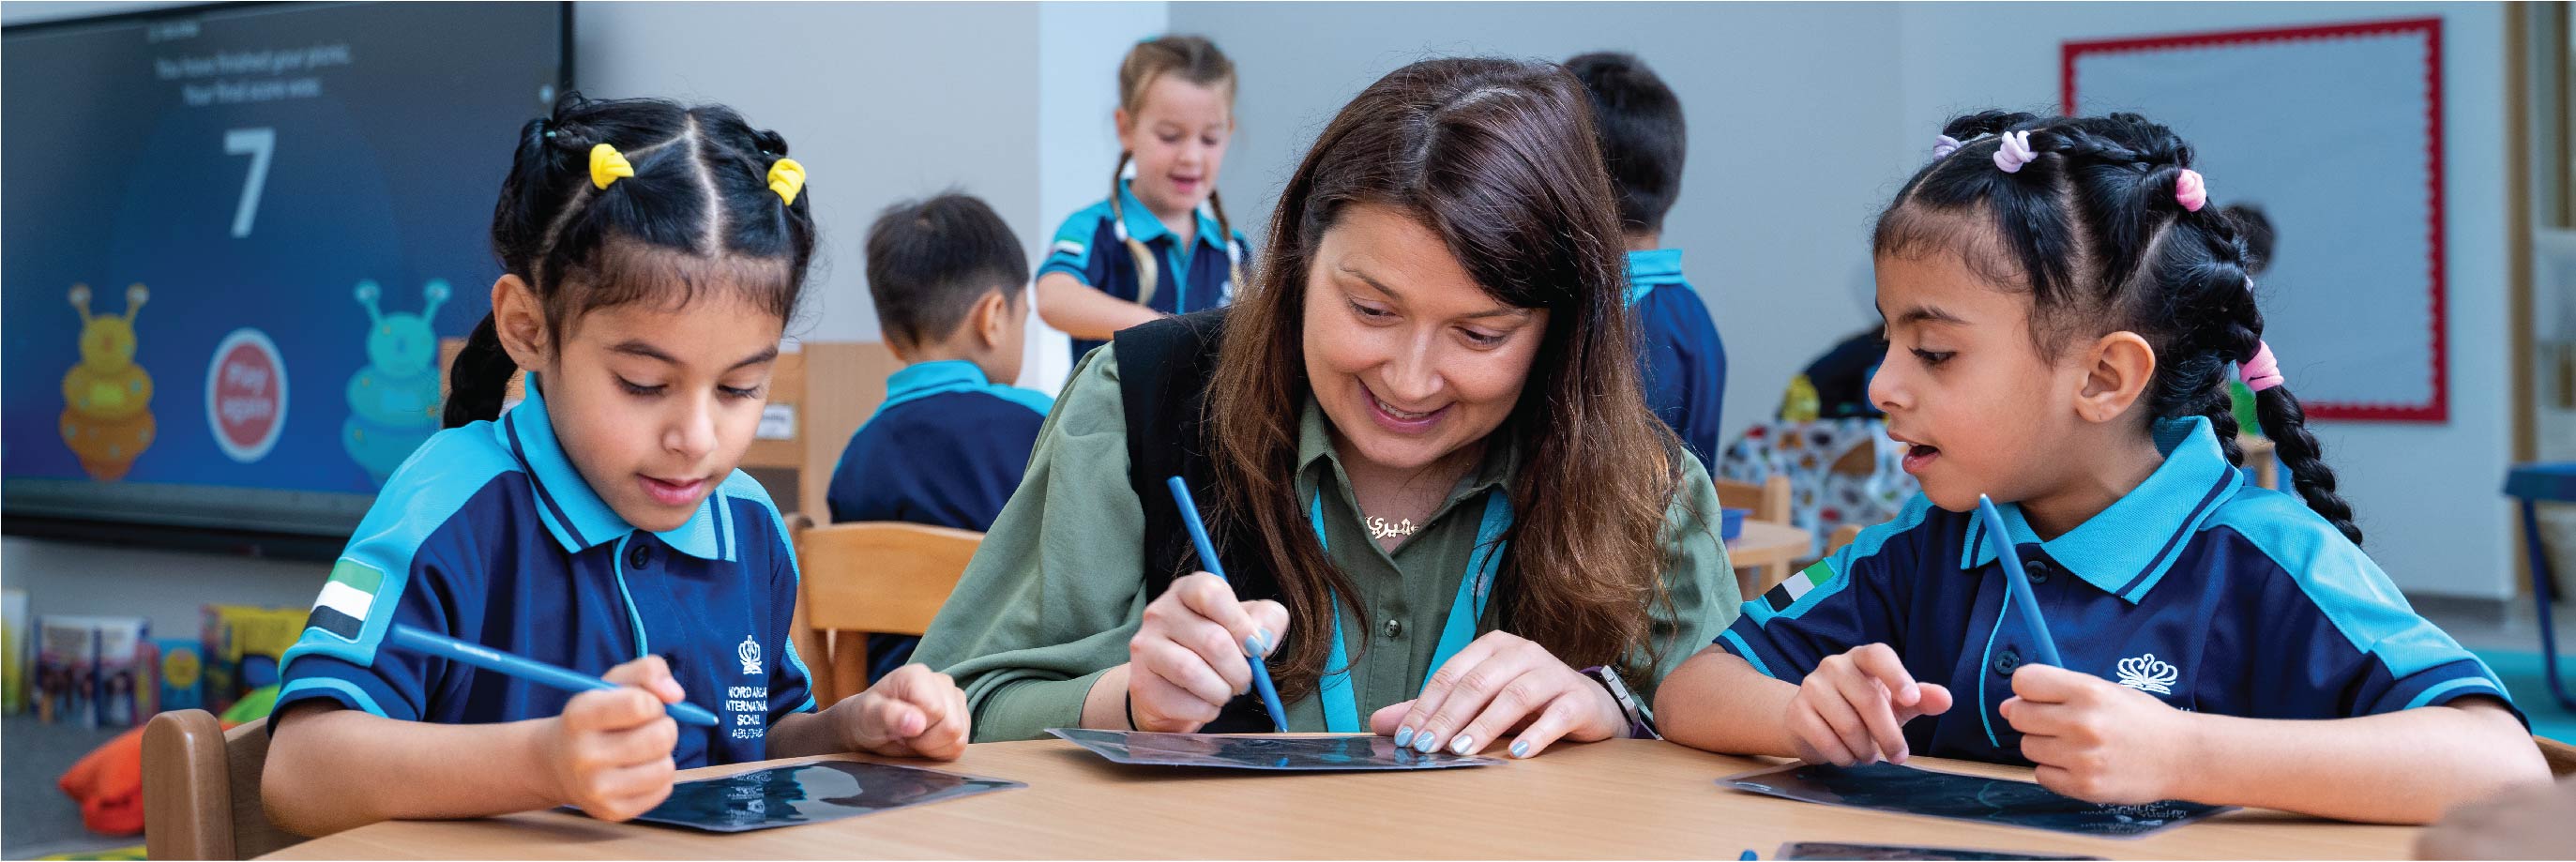 Early Learning | Nord Anglia International School Abu Dhabi - Content Page Header